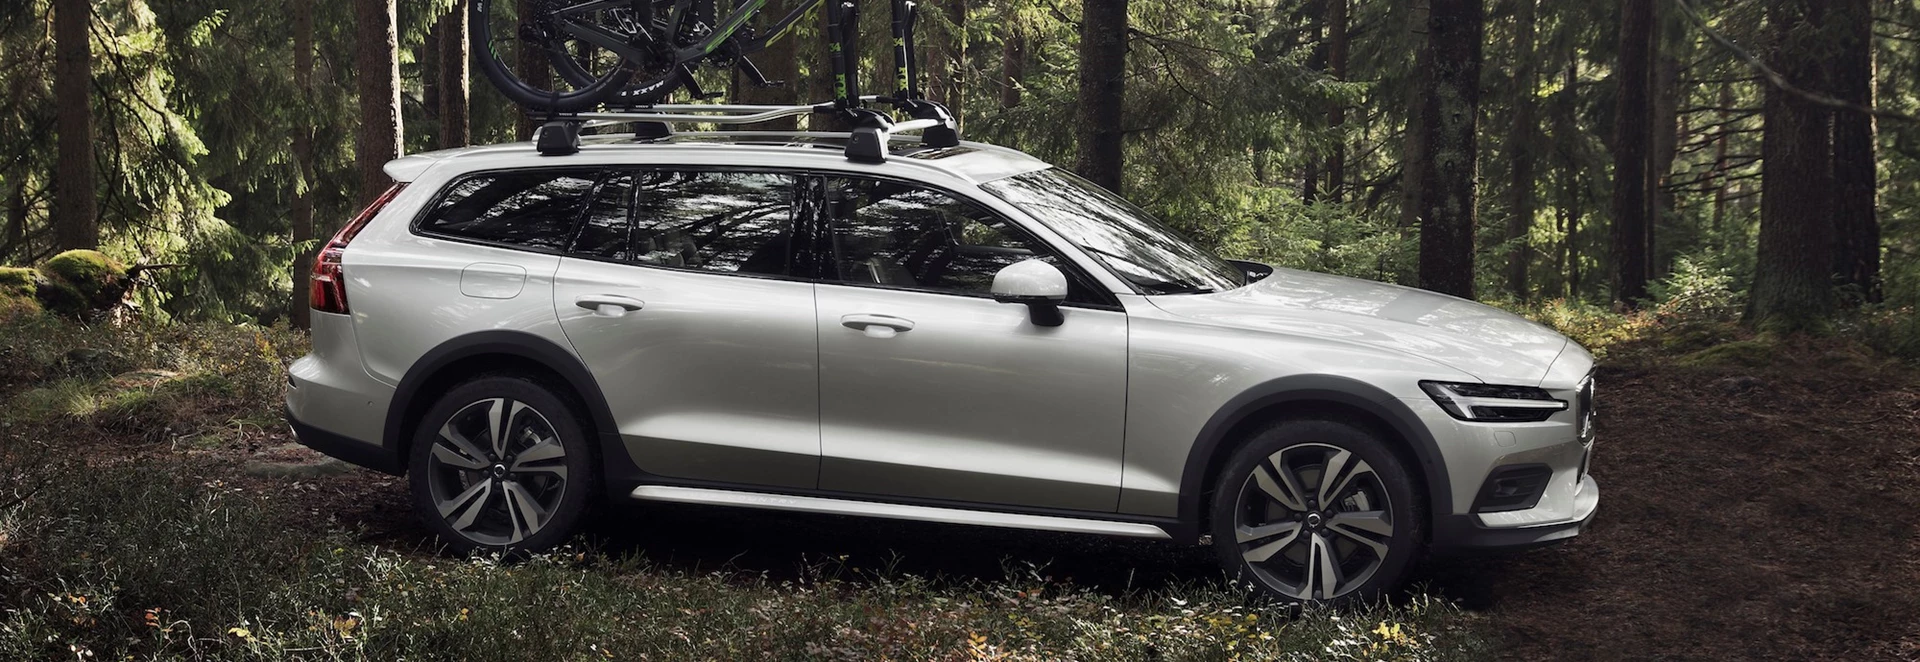 2019 Volvo V60 Cross Country pricing announced 